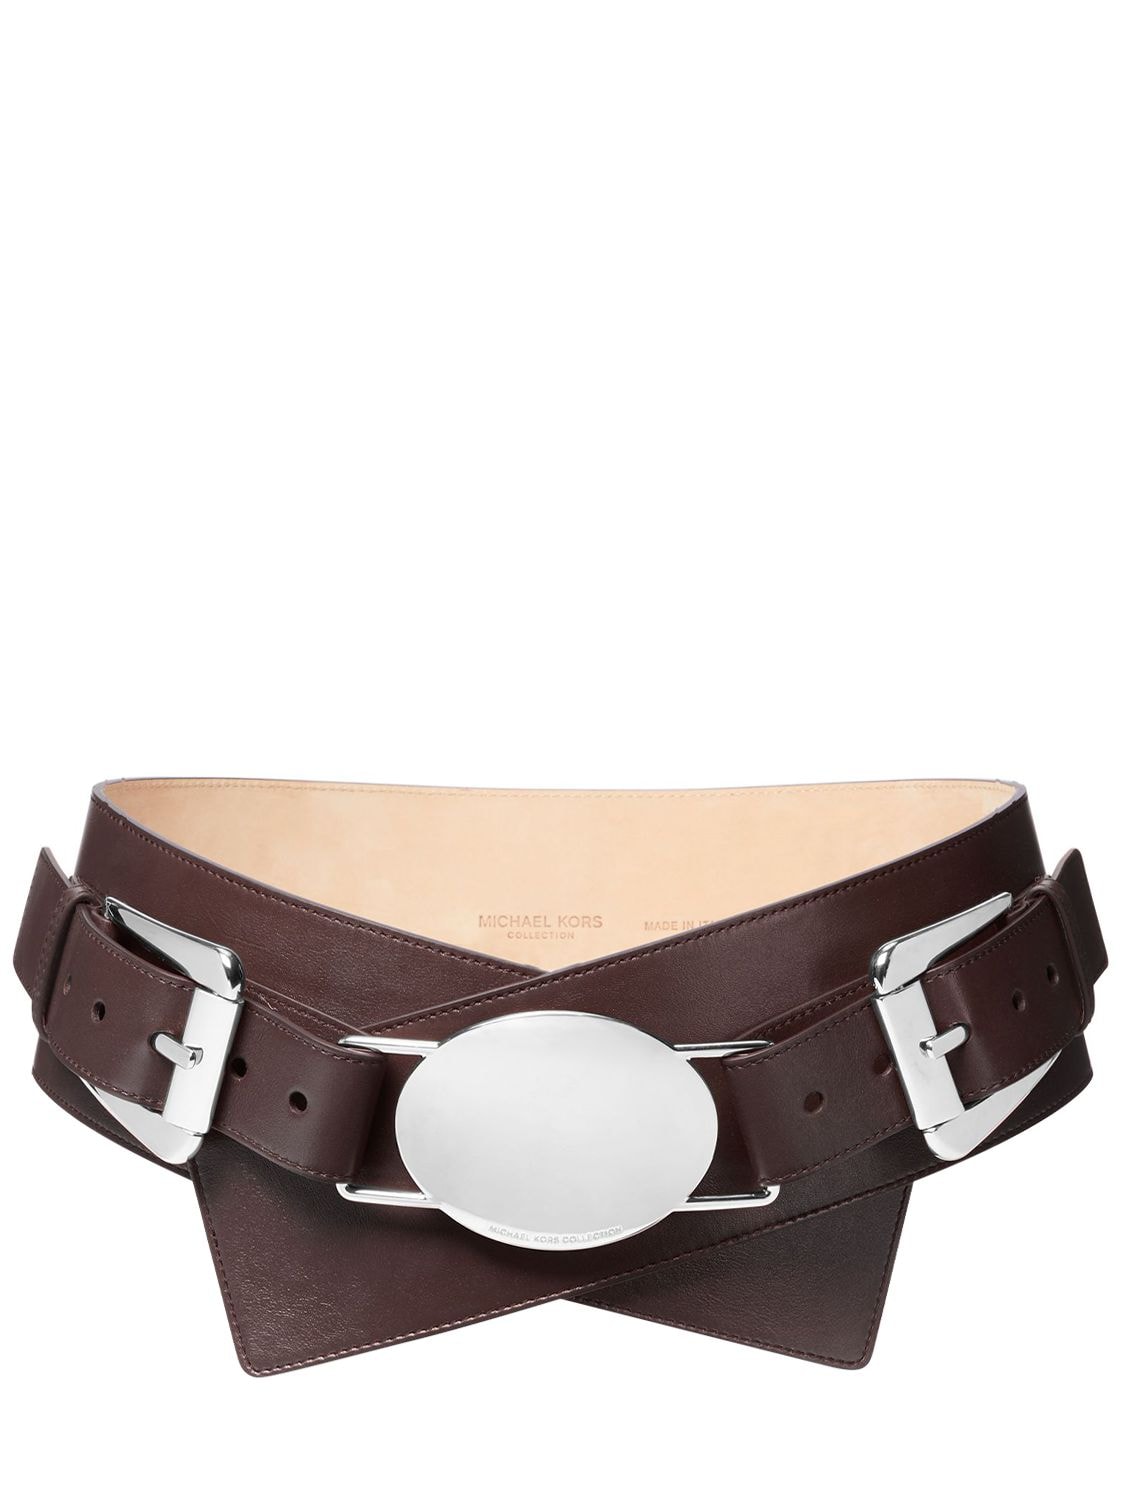 Michael Kors Gloria Leather Double Buckle Large Belt In Chocolate